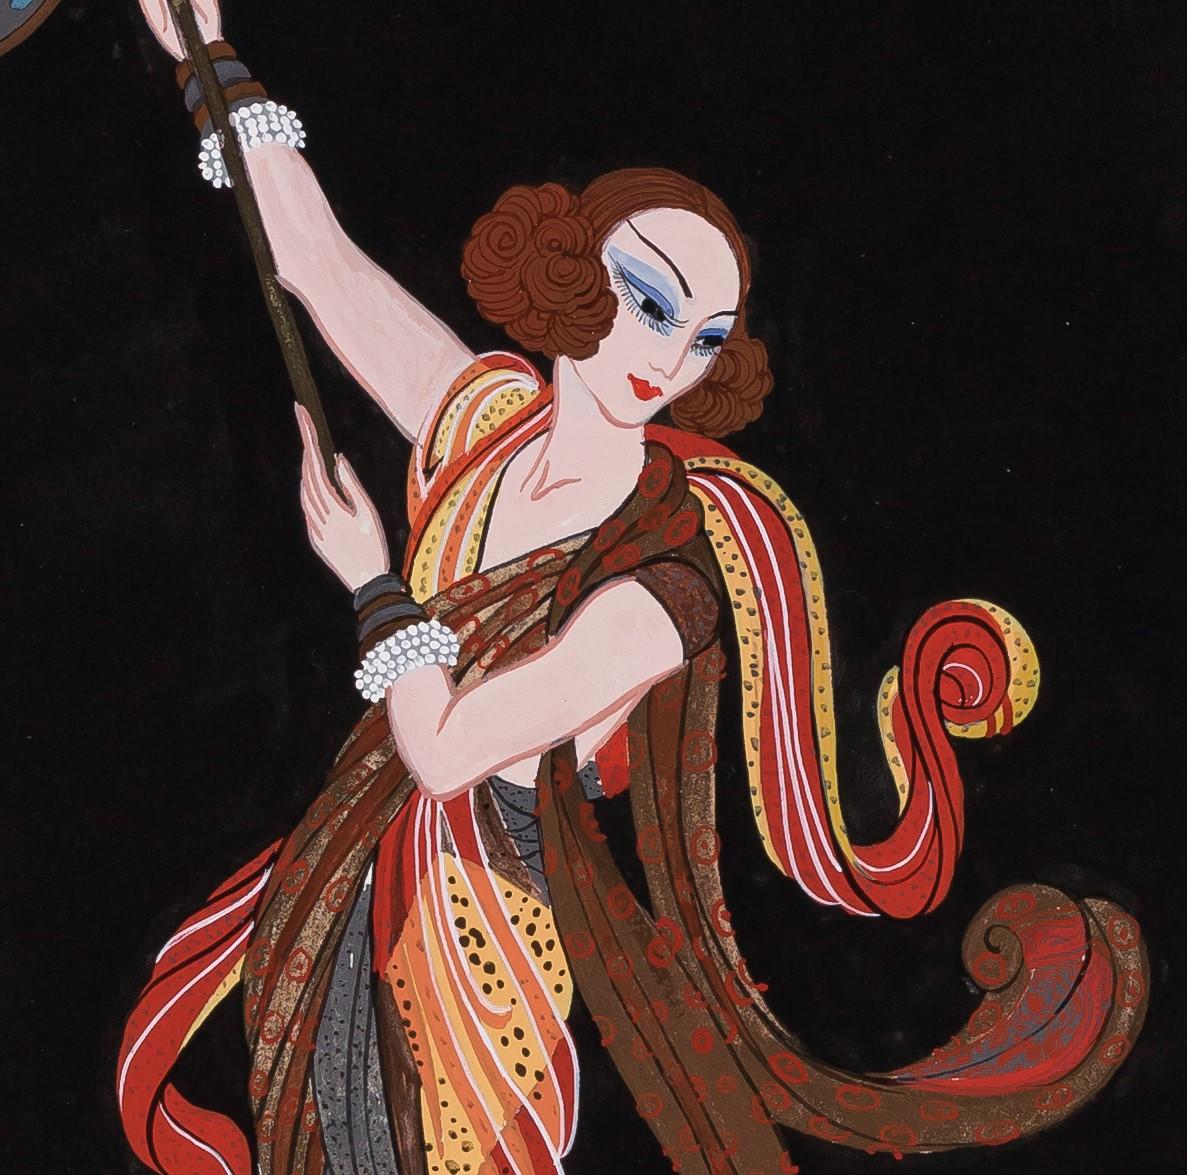 Les Rois des Lègendes, Costume pour femme ésclave from 1919 is a gouache painting on black paper, 10.75 x 9 inches, framed in a custom, closed-corner, Art Deco frame, 24 x 20 inches. Signed recto 'Erté' mid right and annotated in fountain pen verso